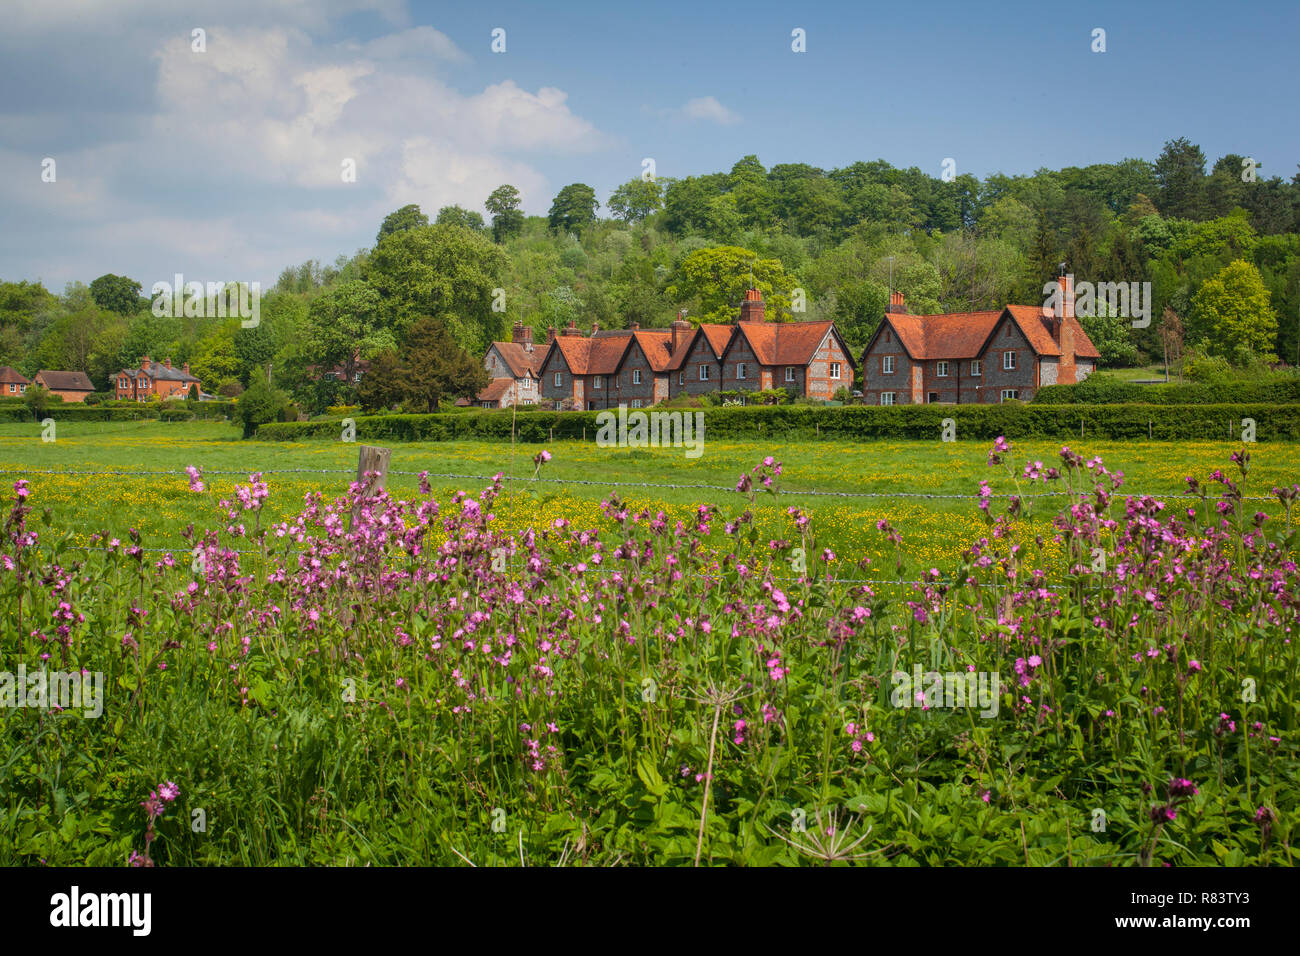 Traditional brick and flint cottages at Hambleden, Buckinghamshire with pink wild flowers in the foreground Stock Photo